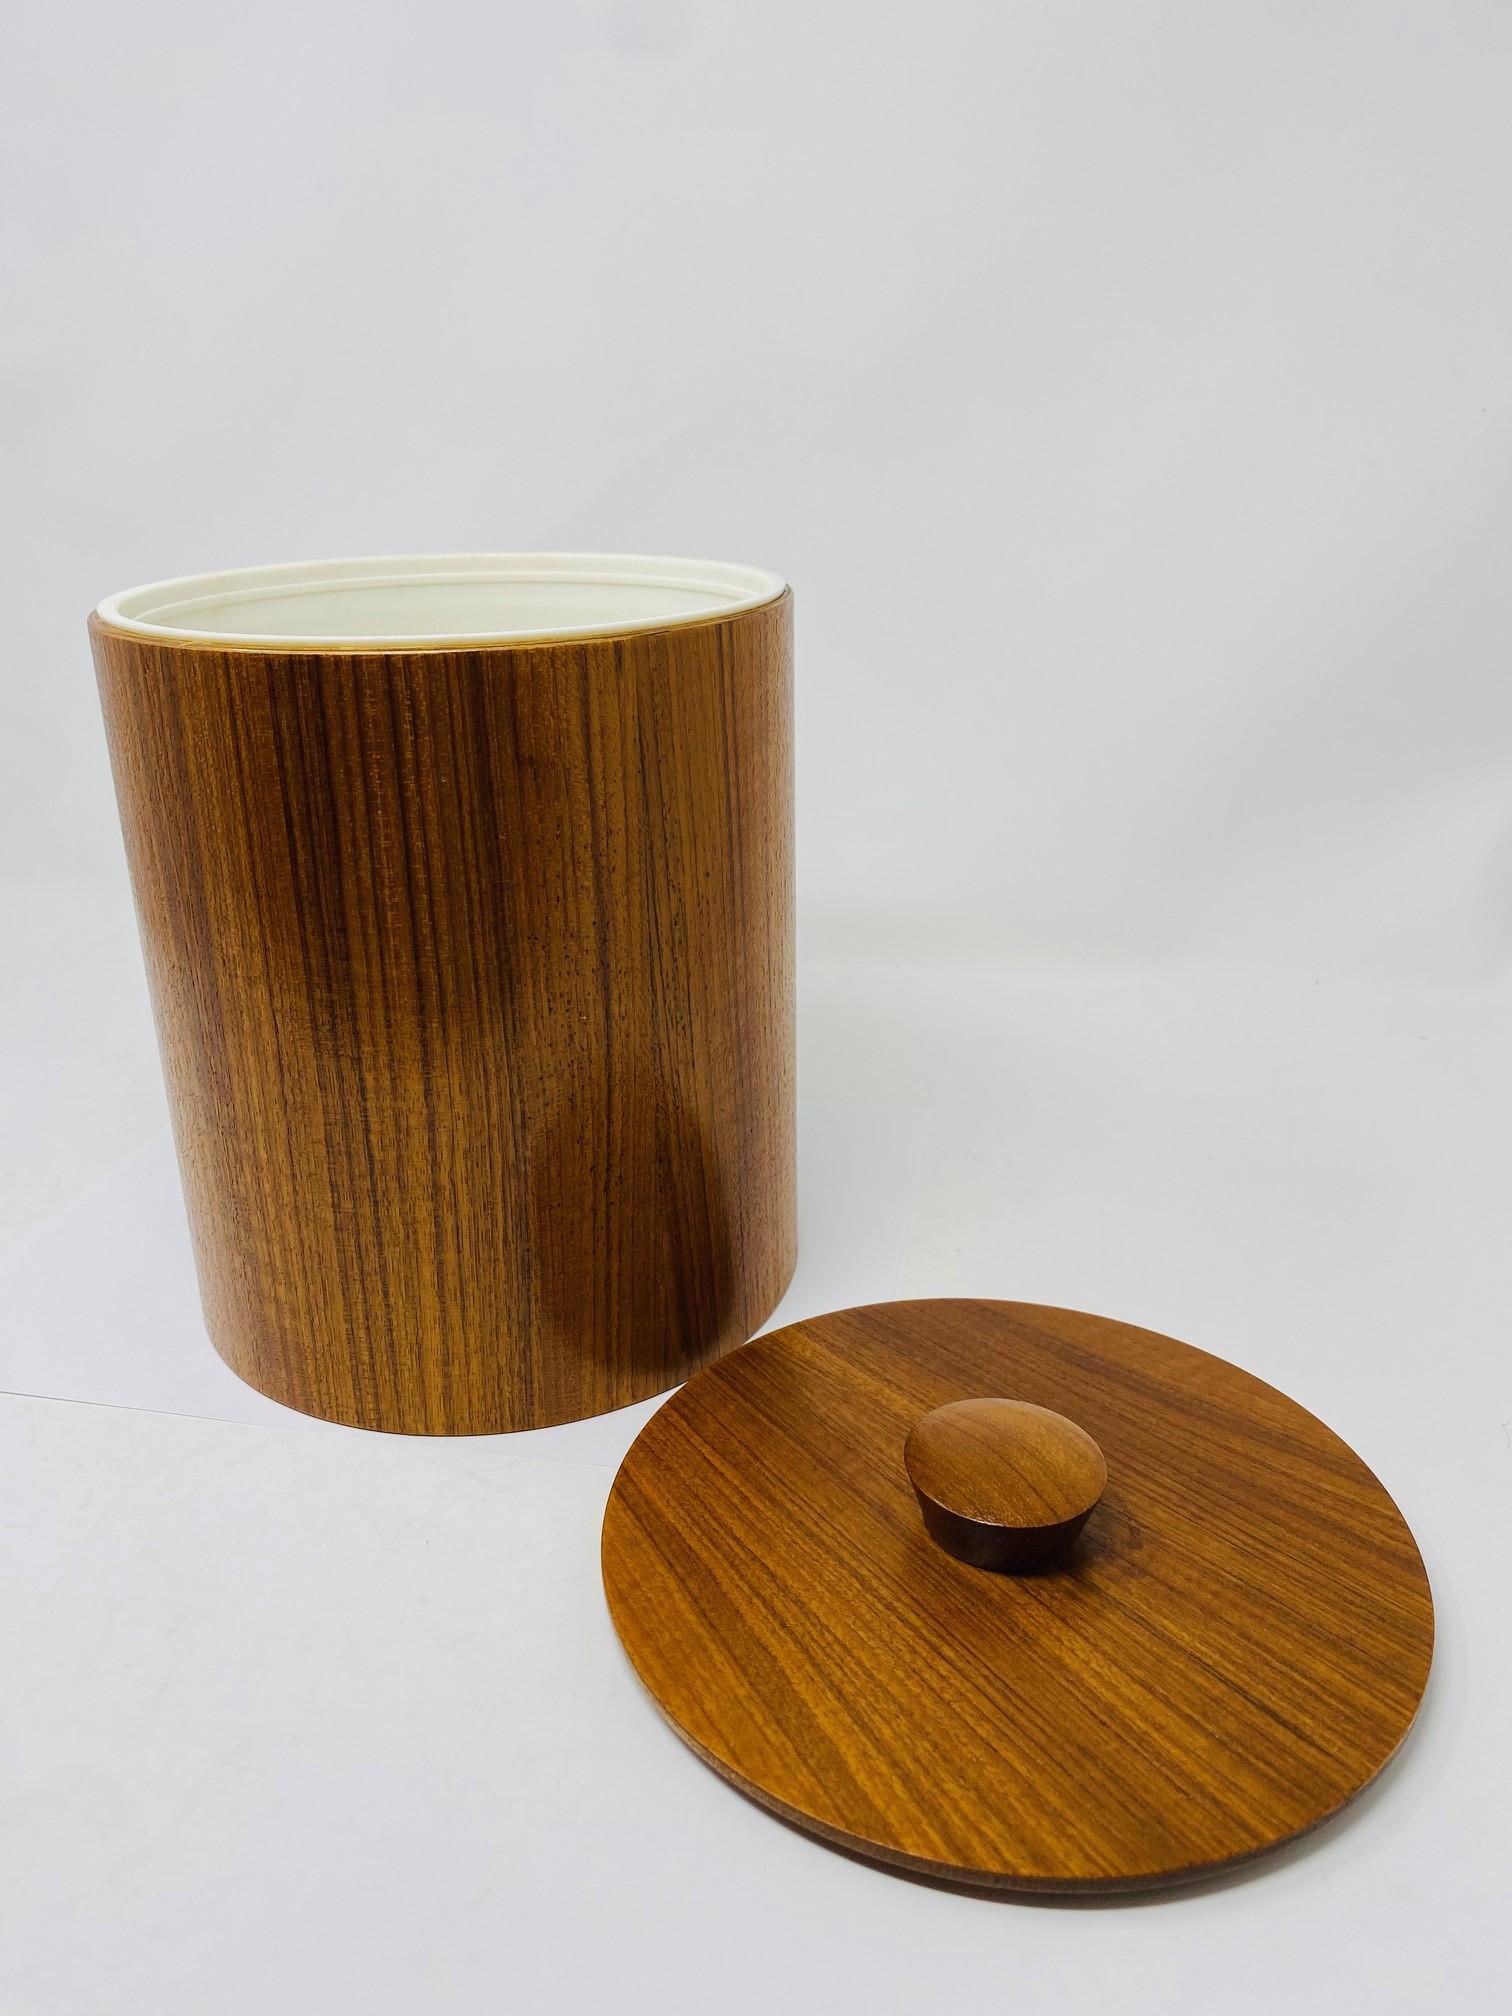 Unique and beautifully crafted vintage Danish midcentury teak ice bucket. This piece has minimal, clean lines while enveloped in the grain of teak with plastic insert.  Linear in shape but rich in style.

Mid-Century, Hollywood Regency, Art Deco,